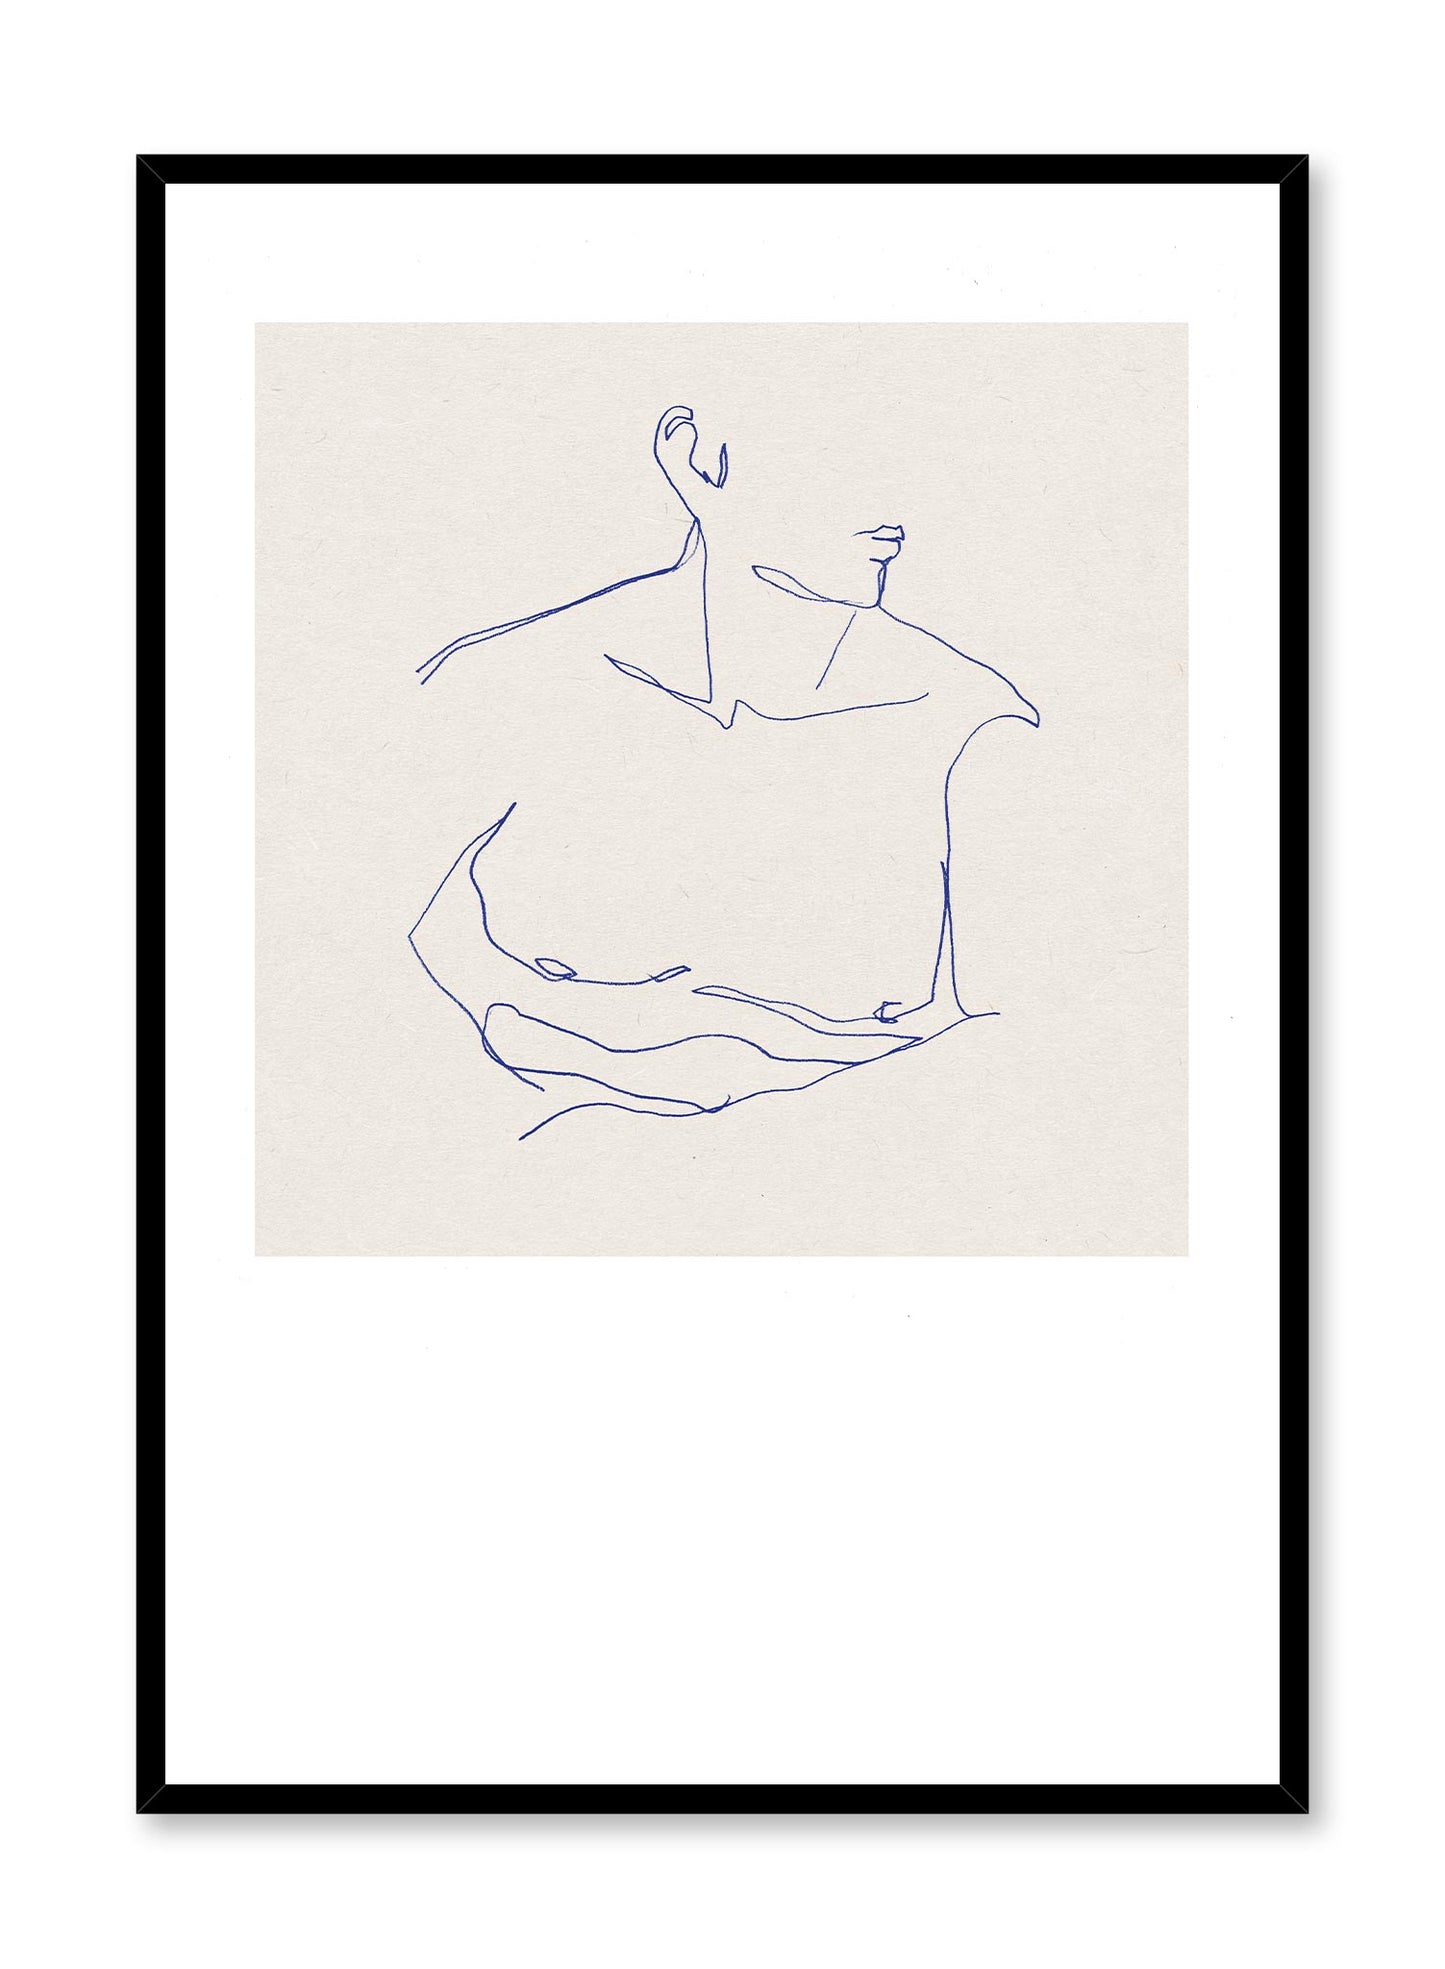 Him is a line art illustration of a man's chiseled chest by Opposite Wall.